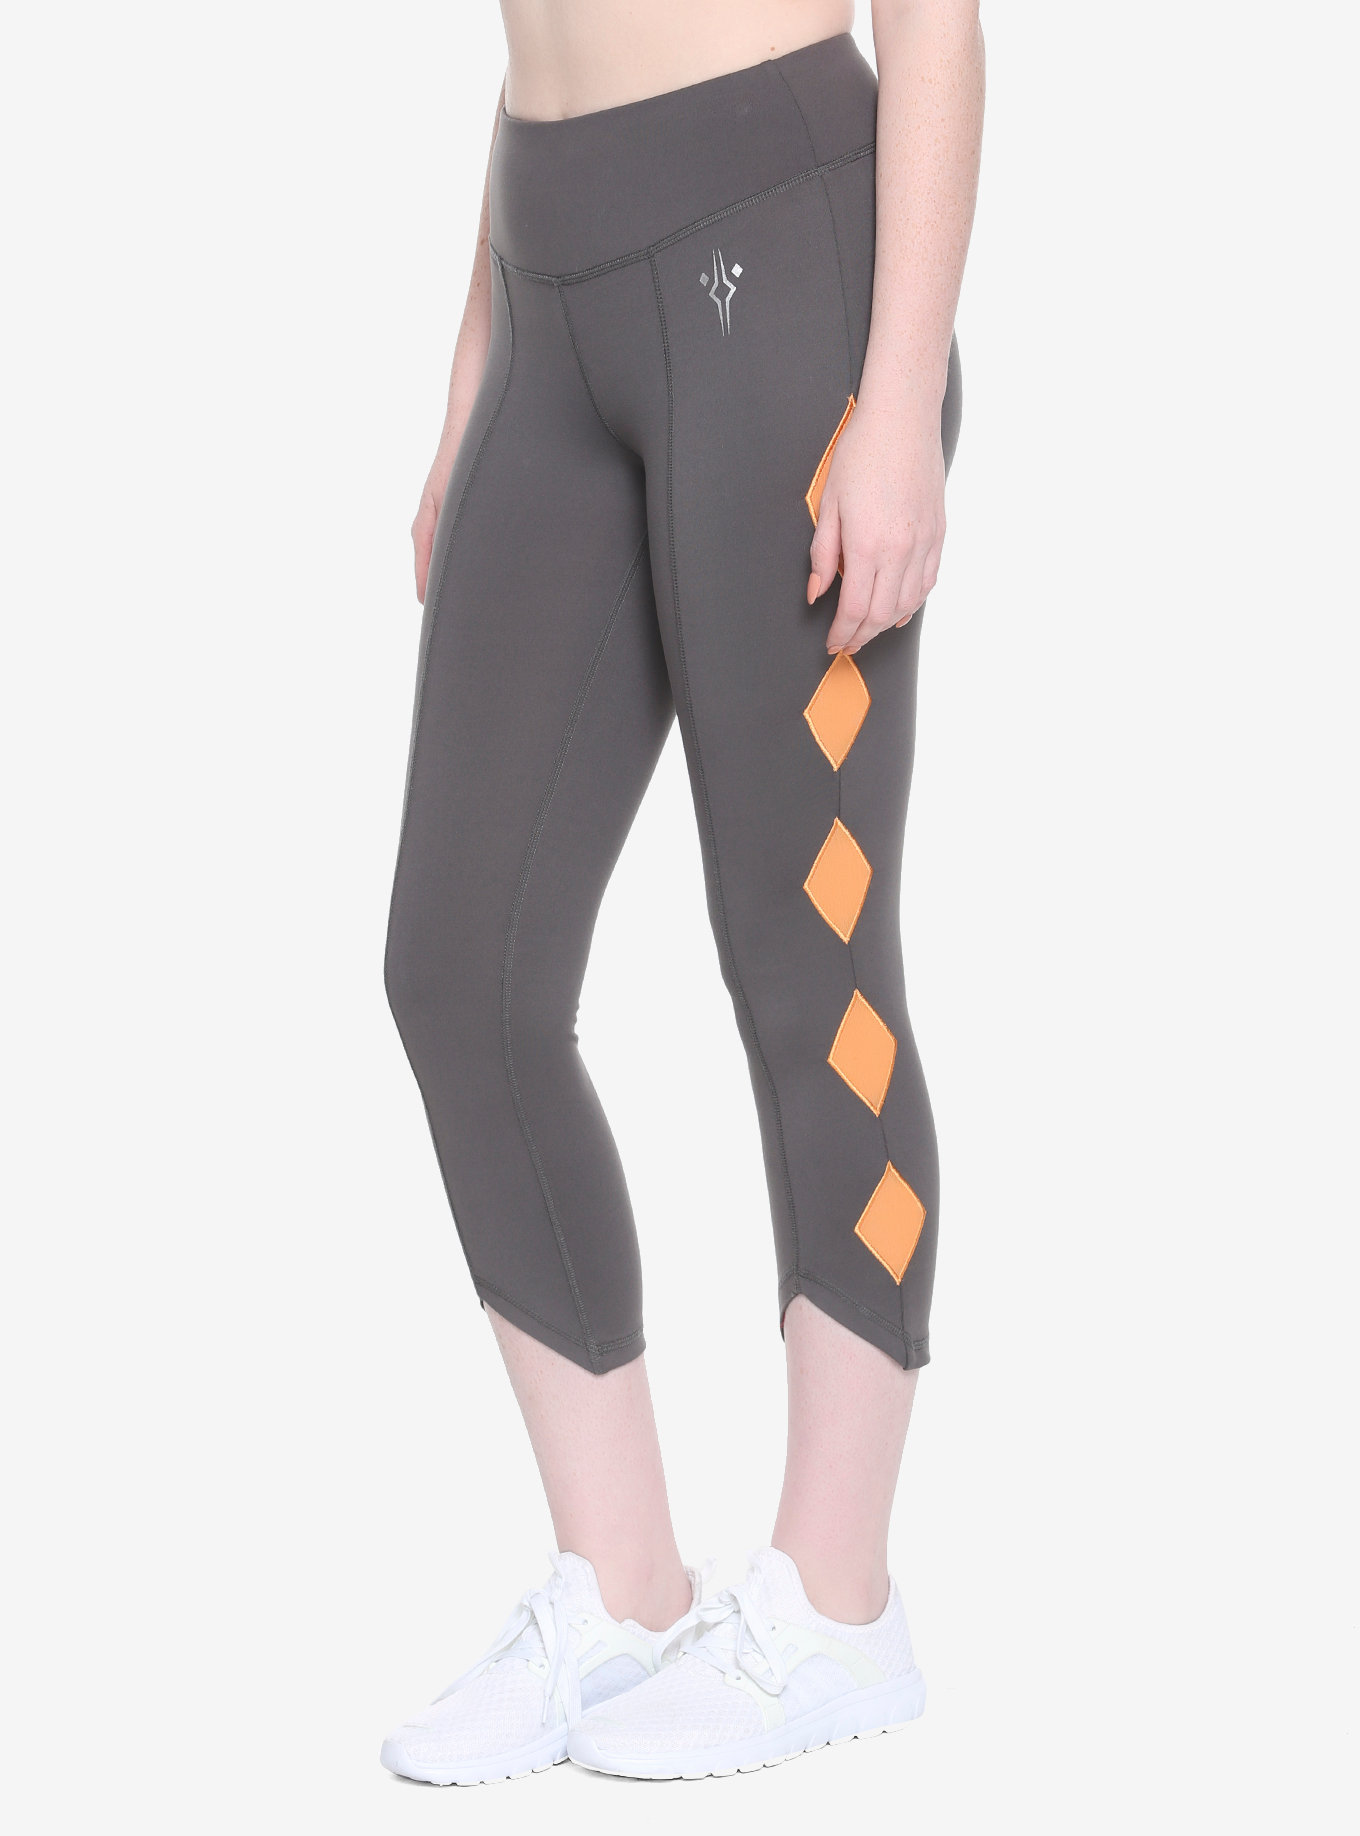 Women's Her Universe x Star Wars Ahsoka Tano Active Collection at Hot Topic